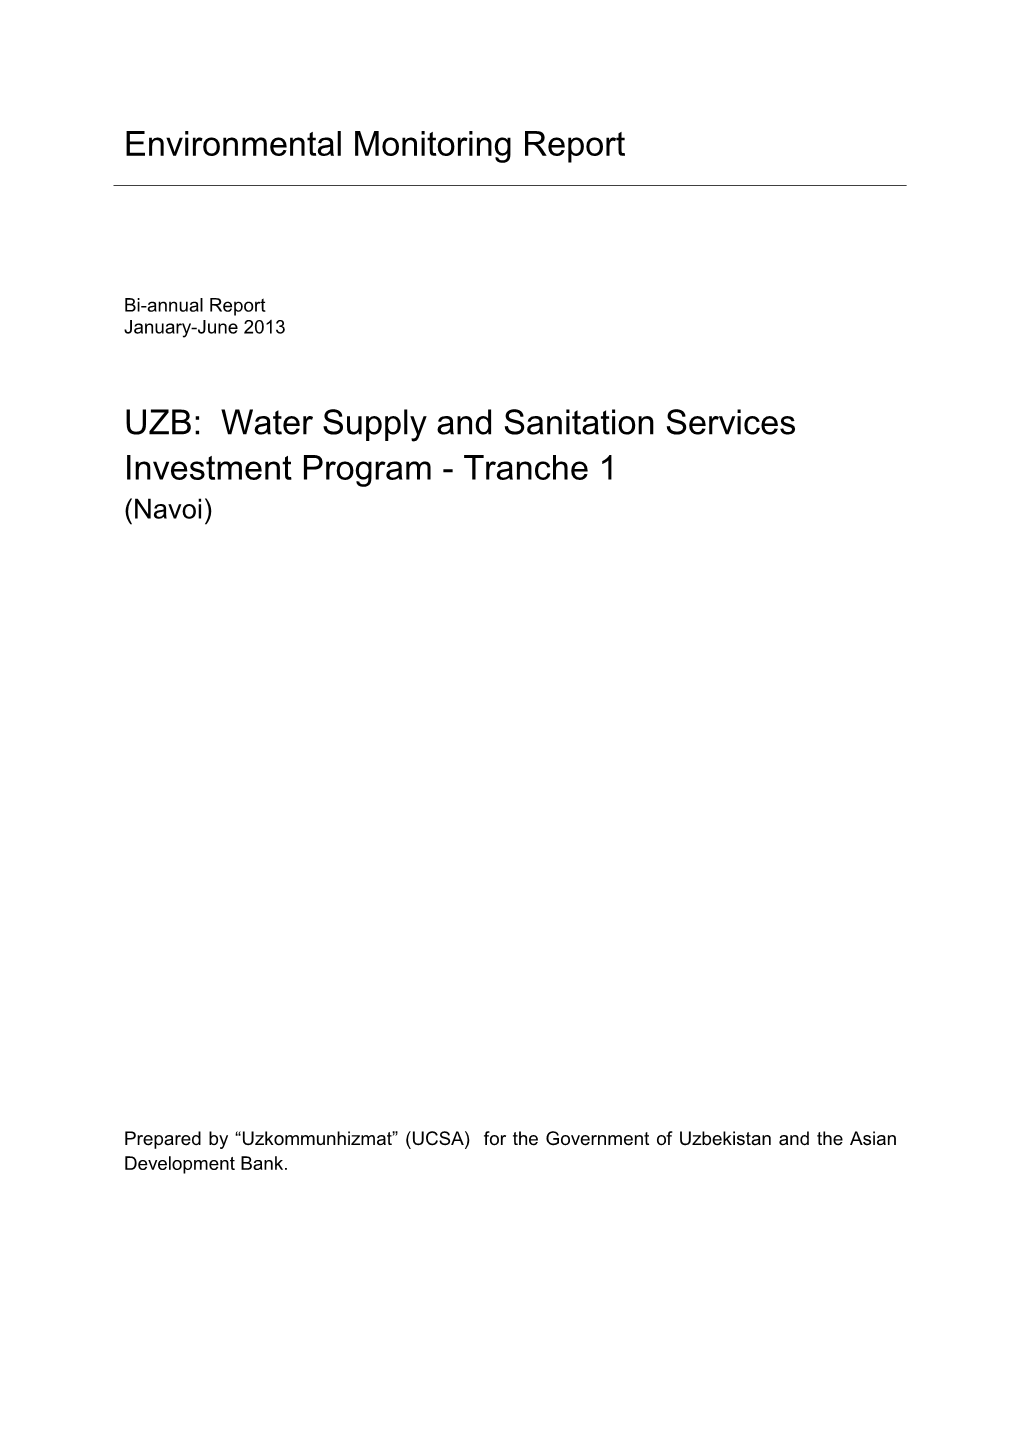 Water Supply and Sanitation Services Investment Program - Tranche 1 (Navoi)